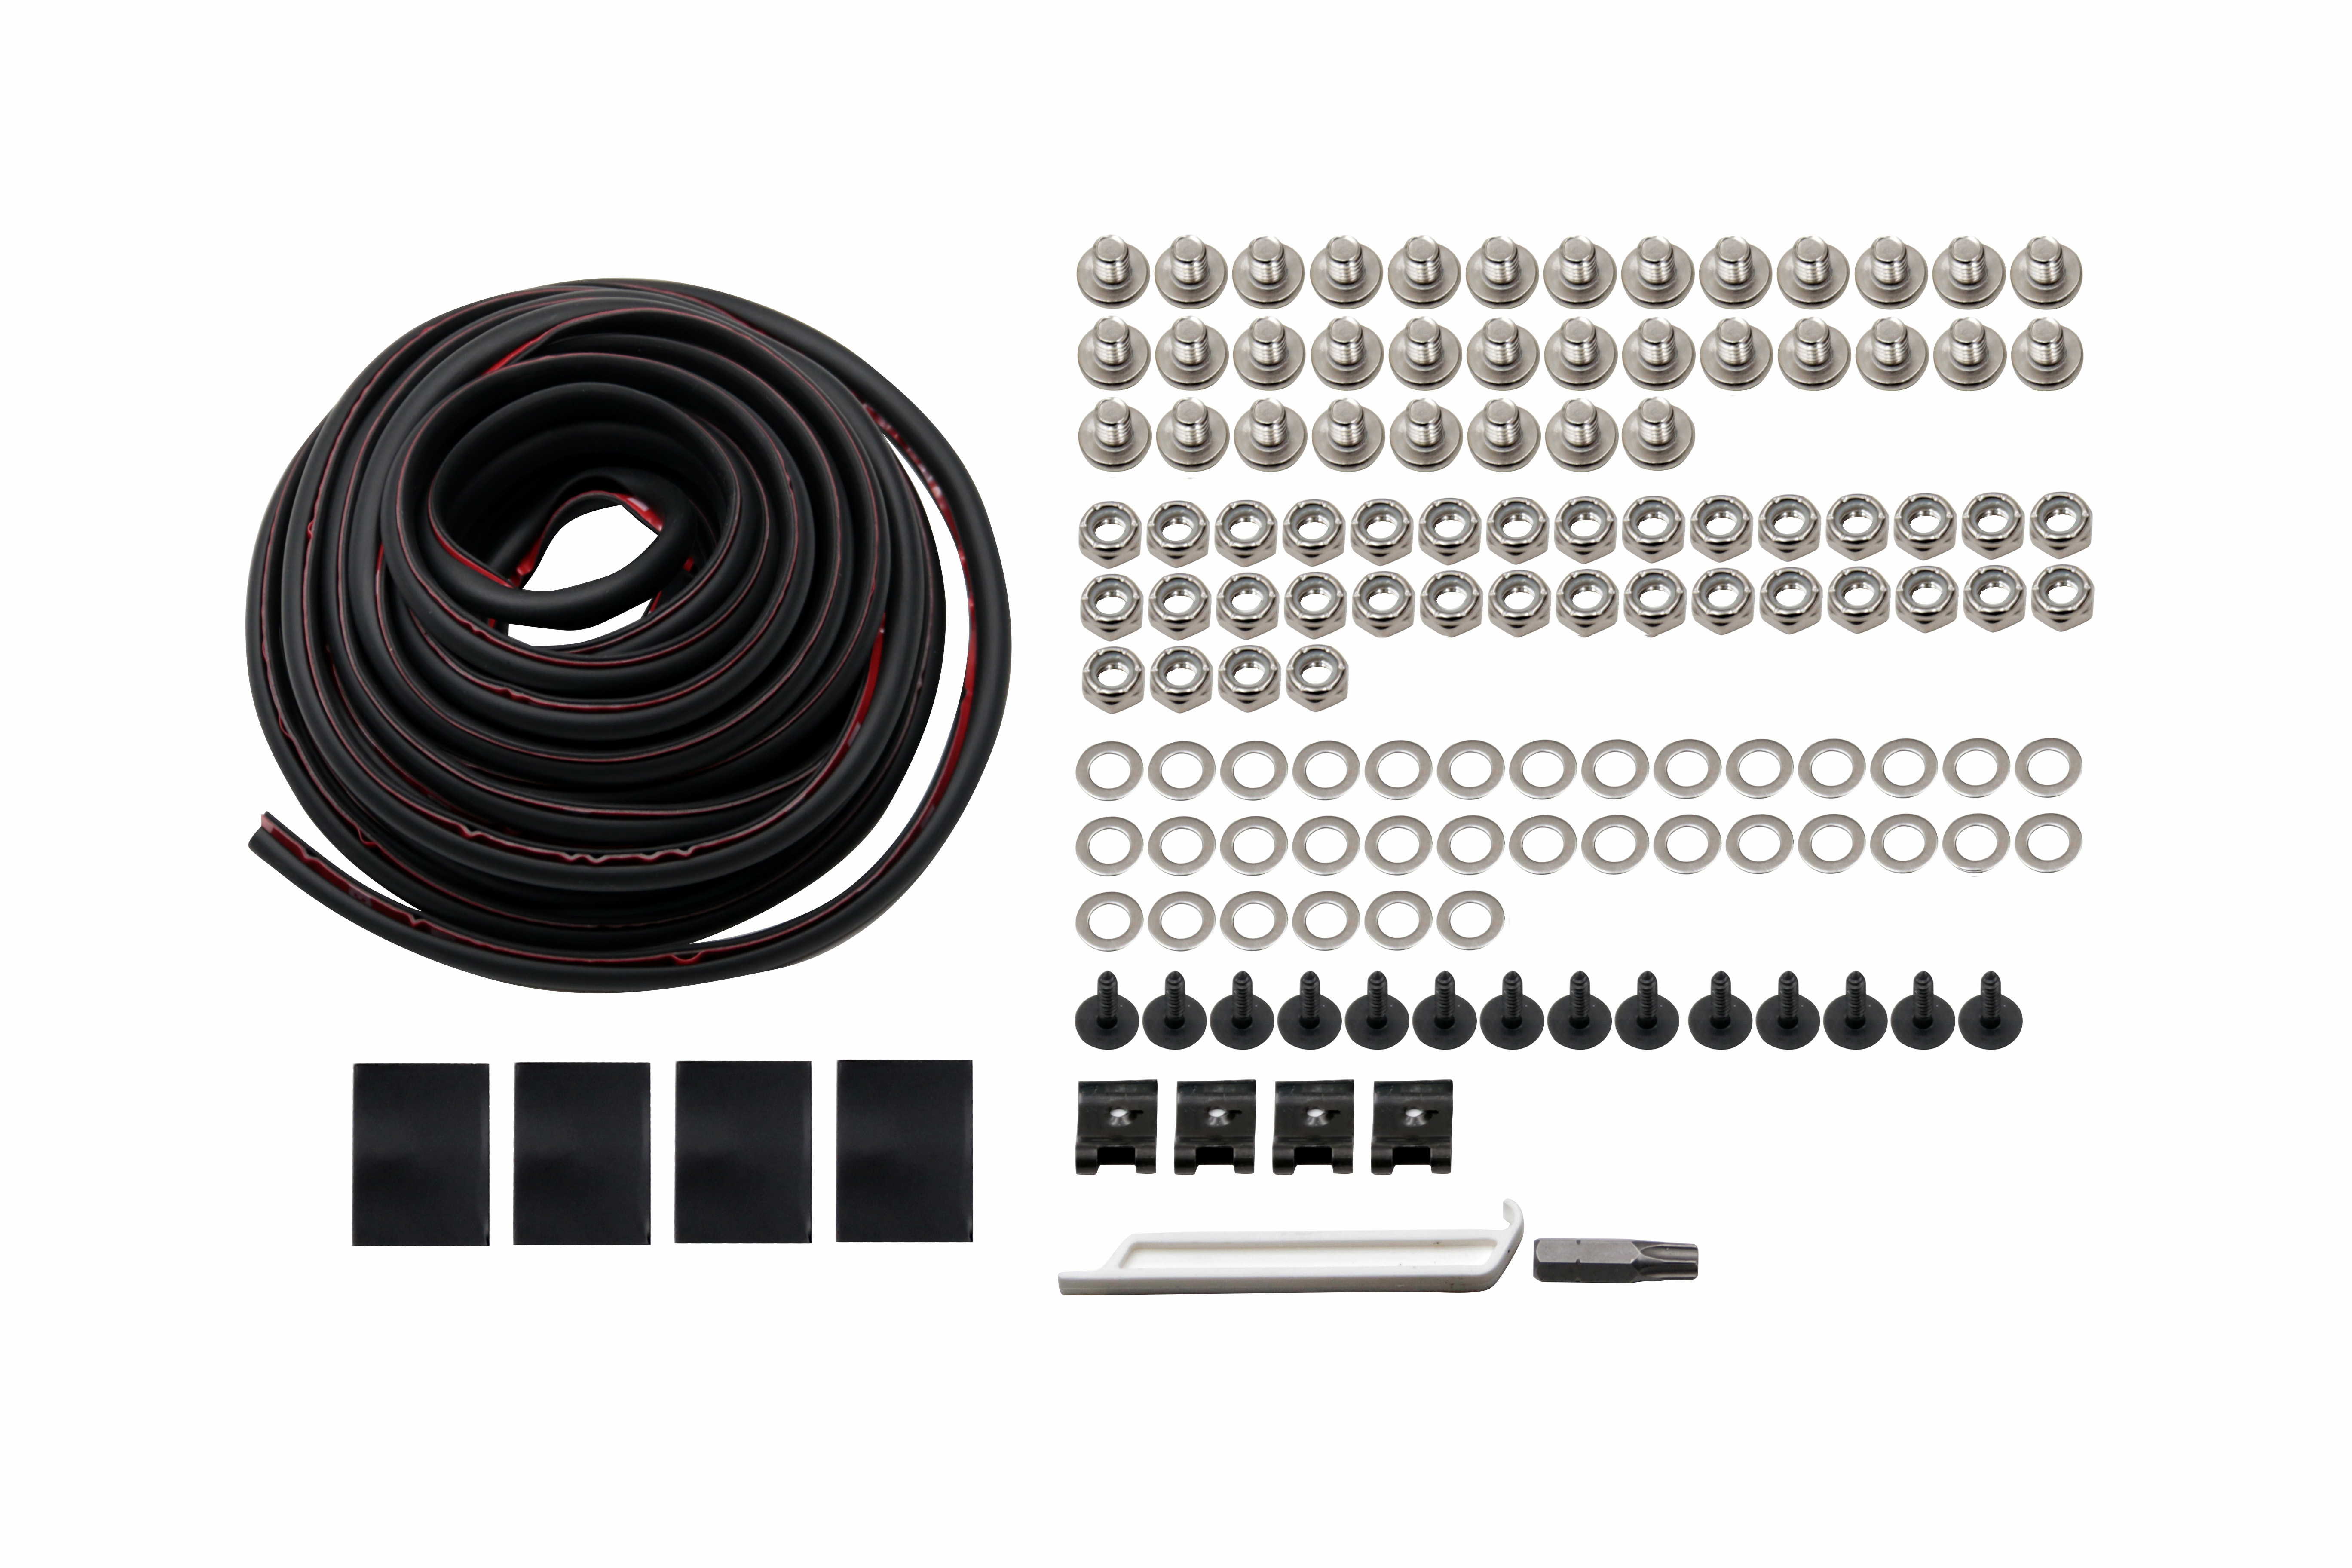 SP-FF4138 Hardware kit for TG-FF8D4138 and TG-FF8D4137